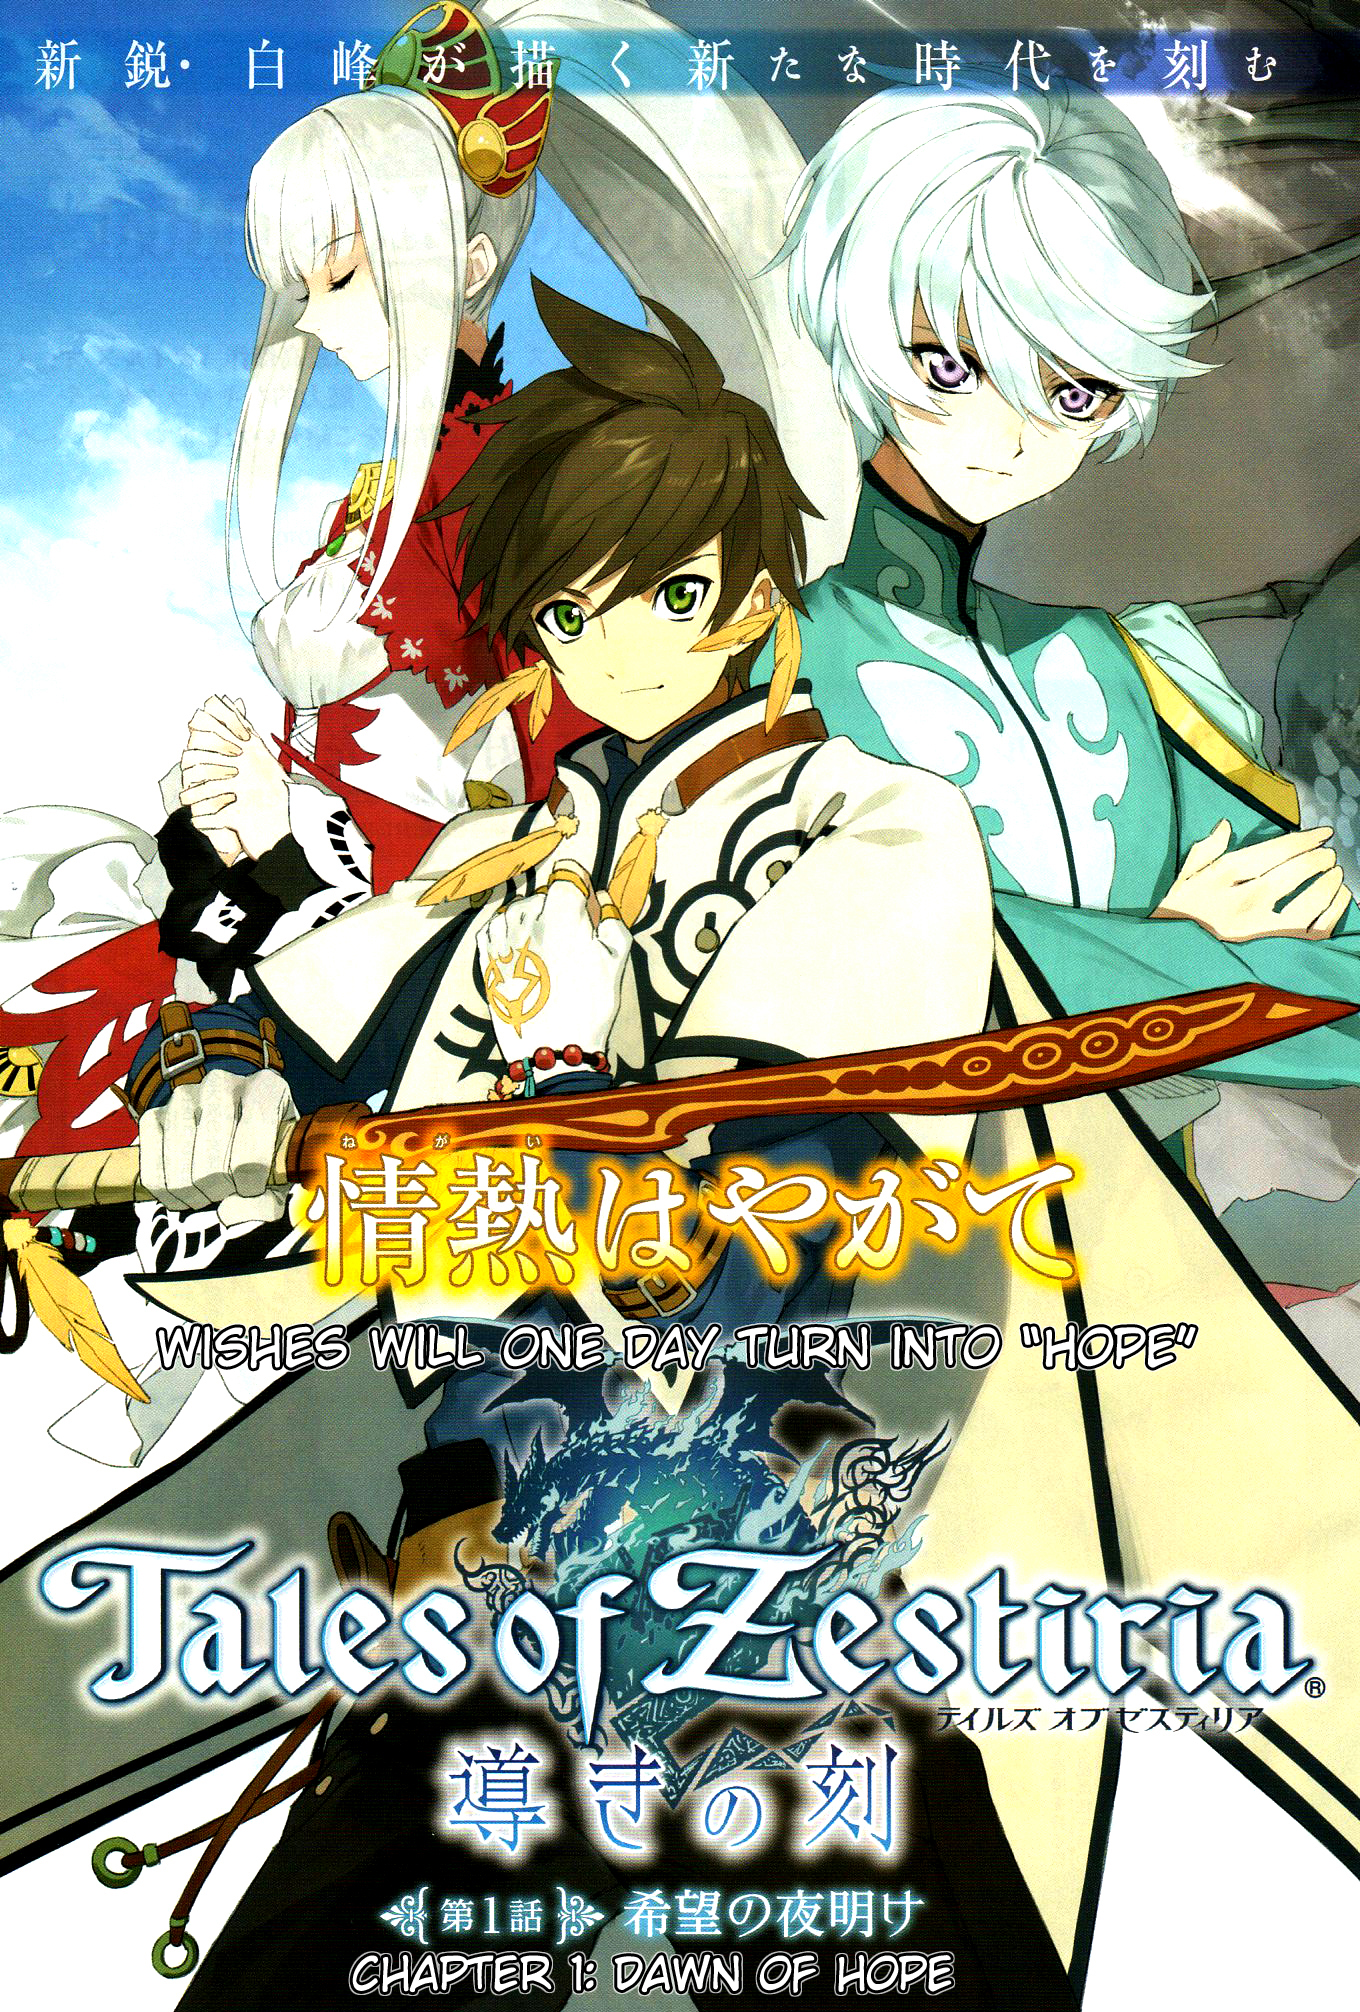 Tales of Zestiria - Time of Guidance